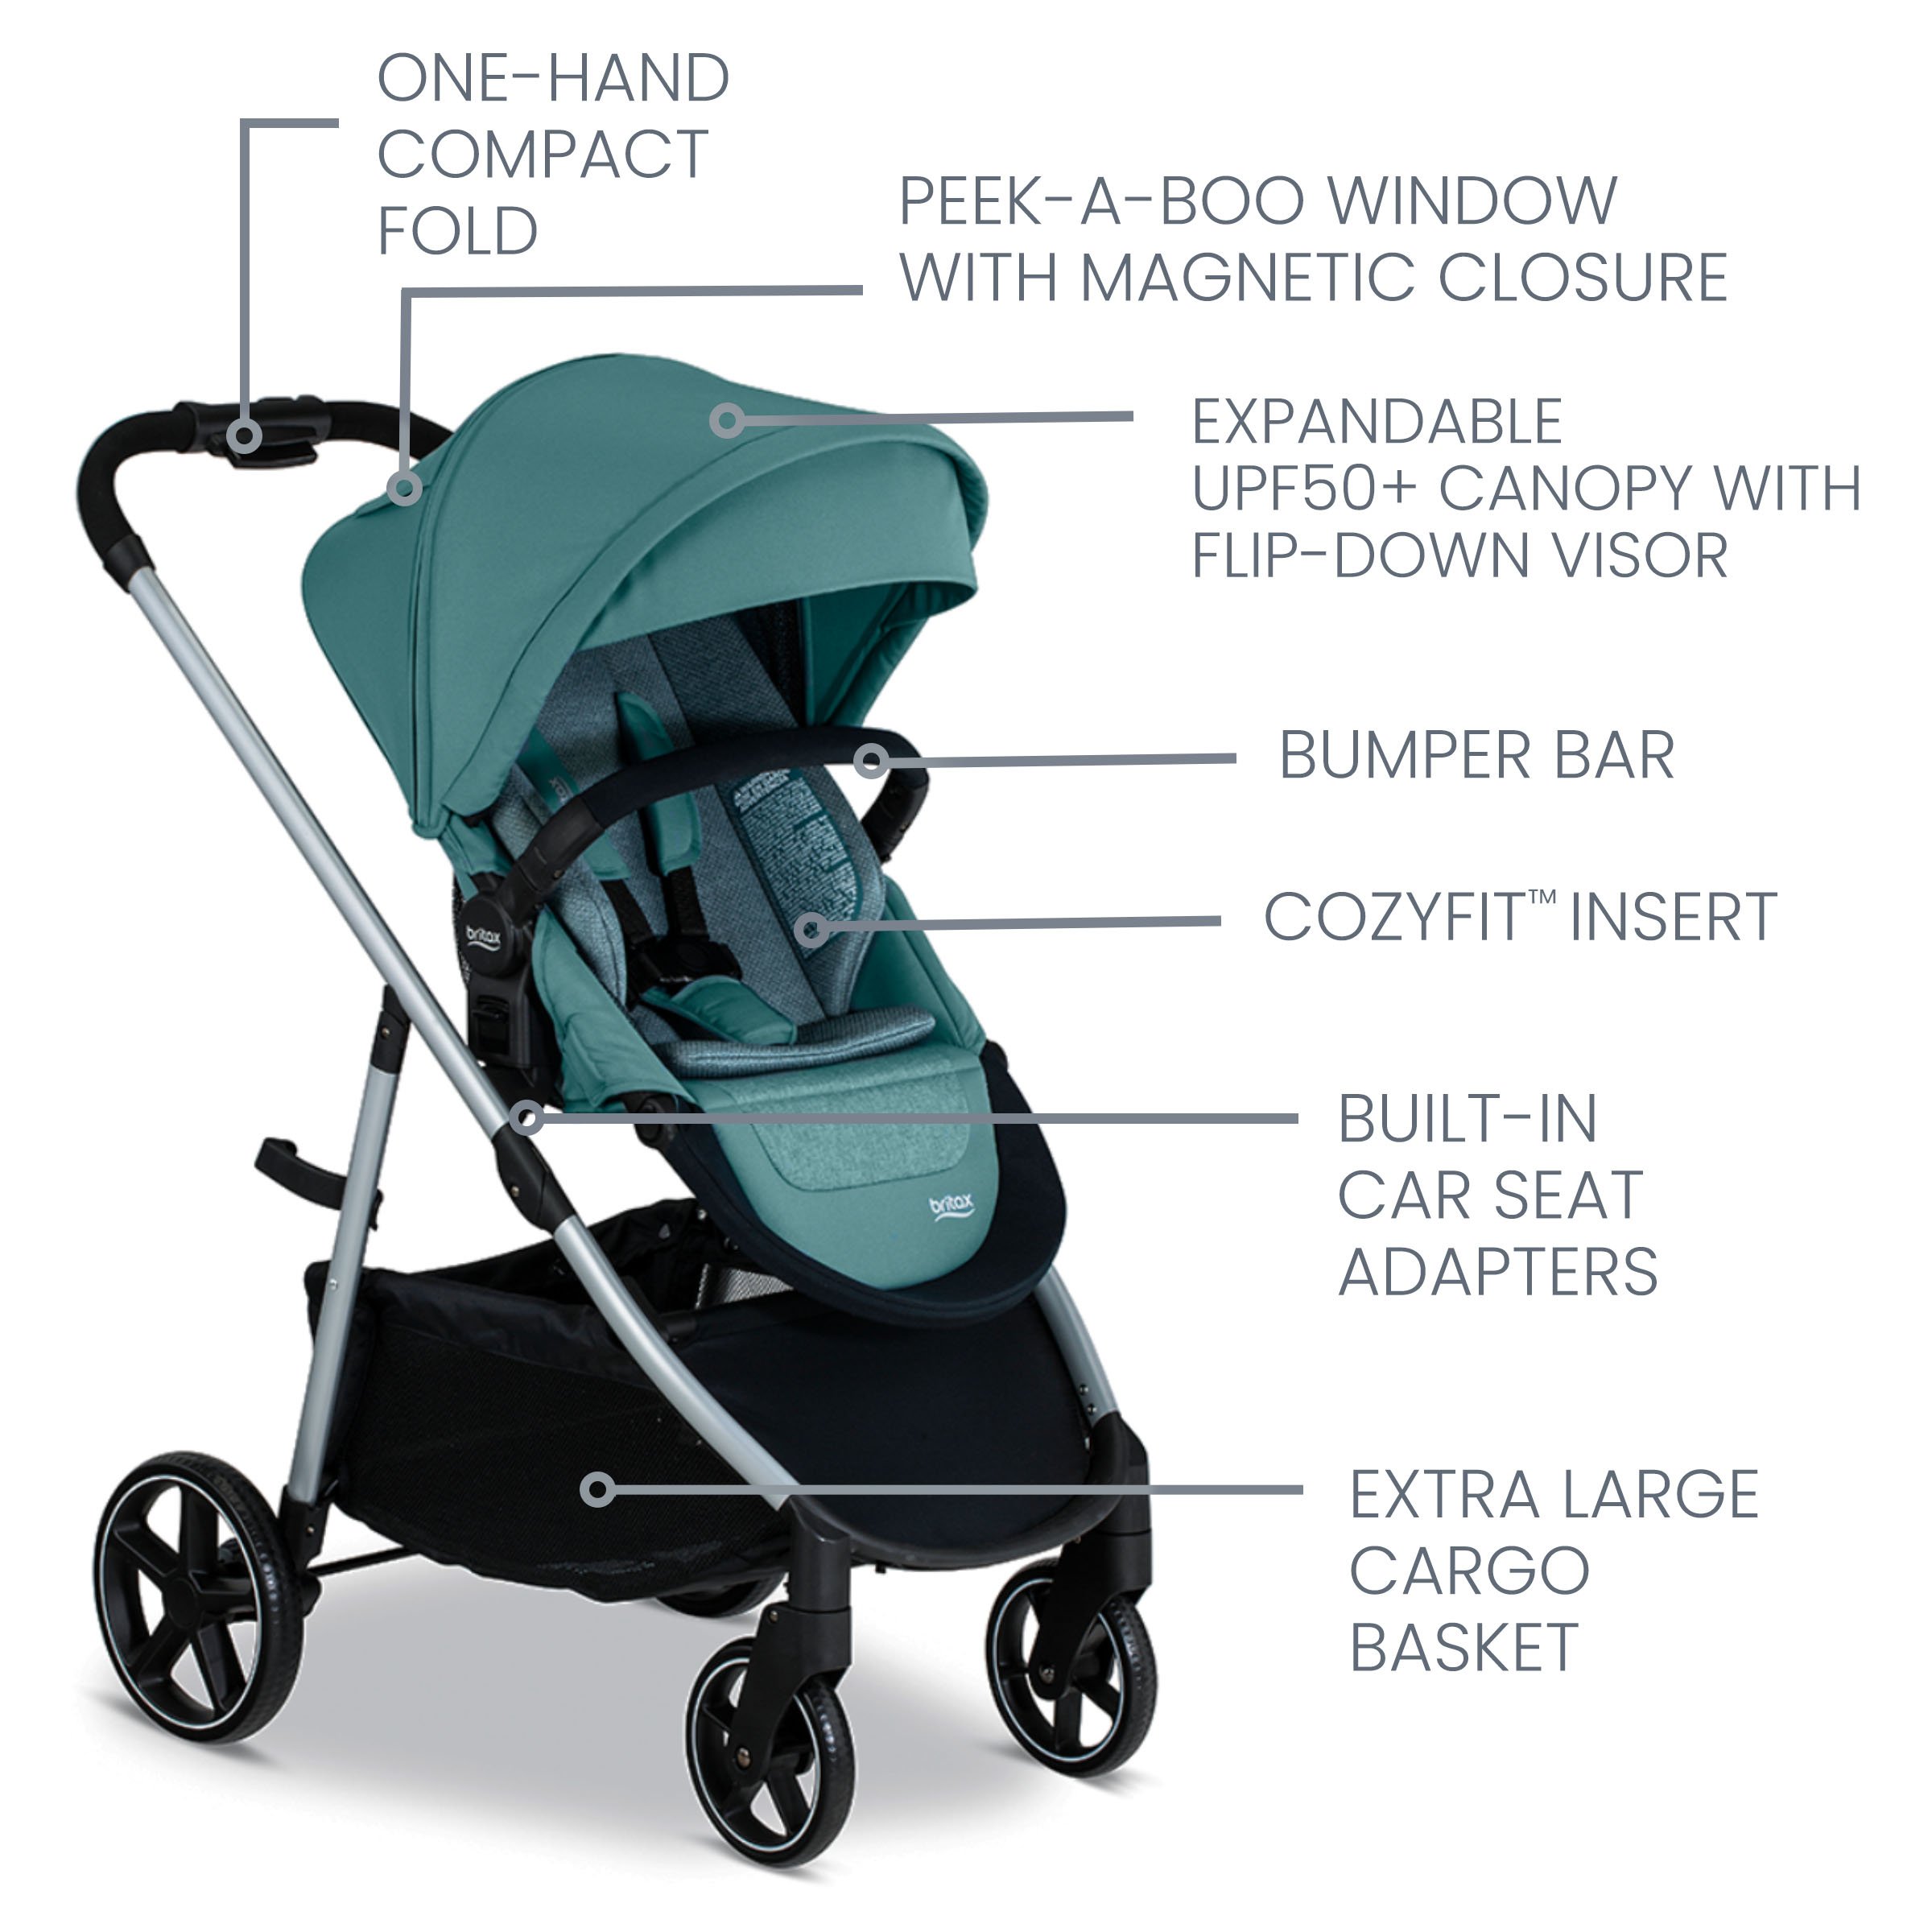 Grove Stroller Features labeled out on Pindot Jade fashion